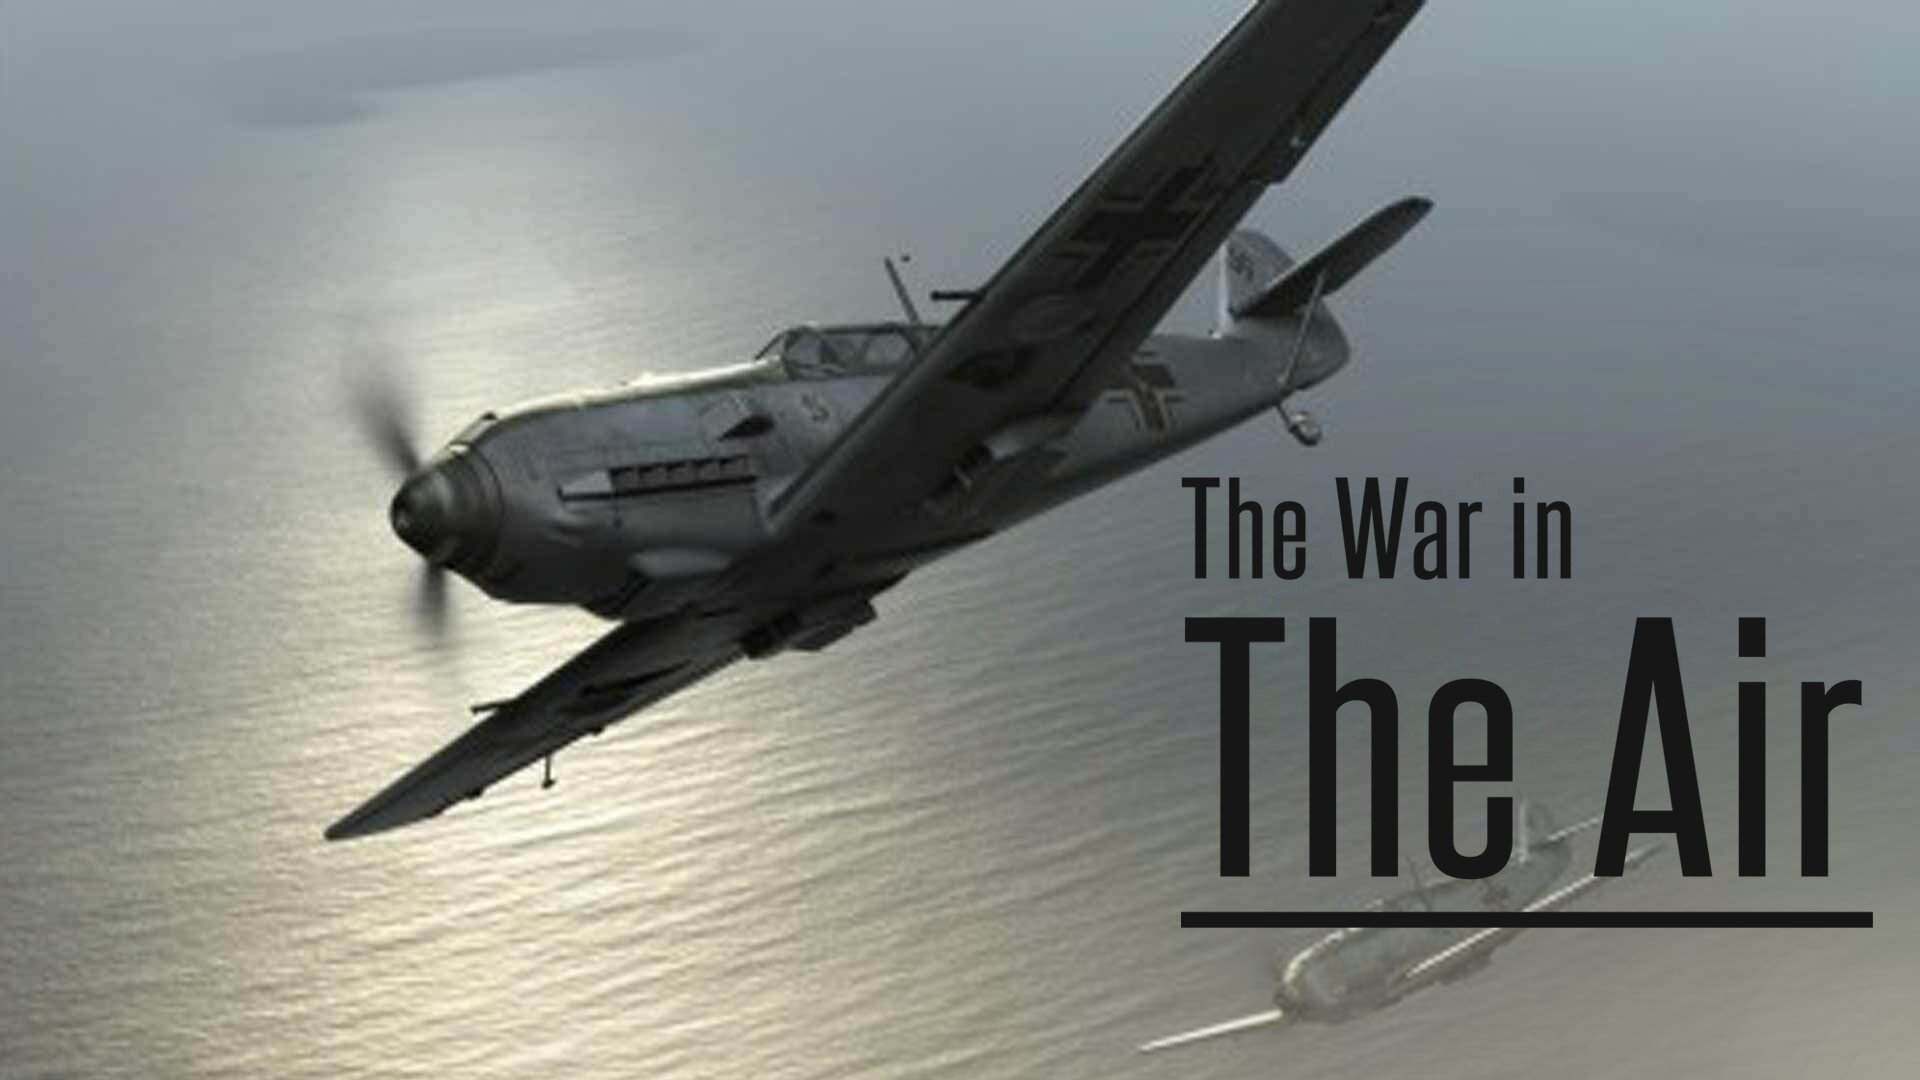 The War In The Air